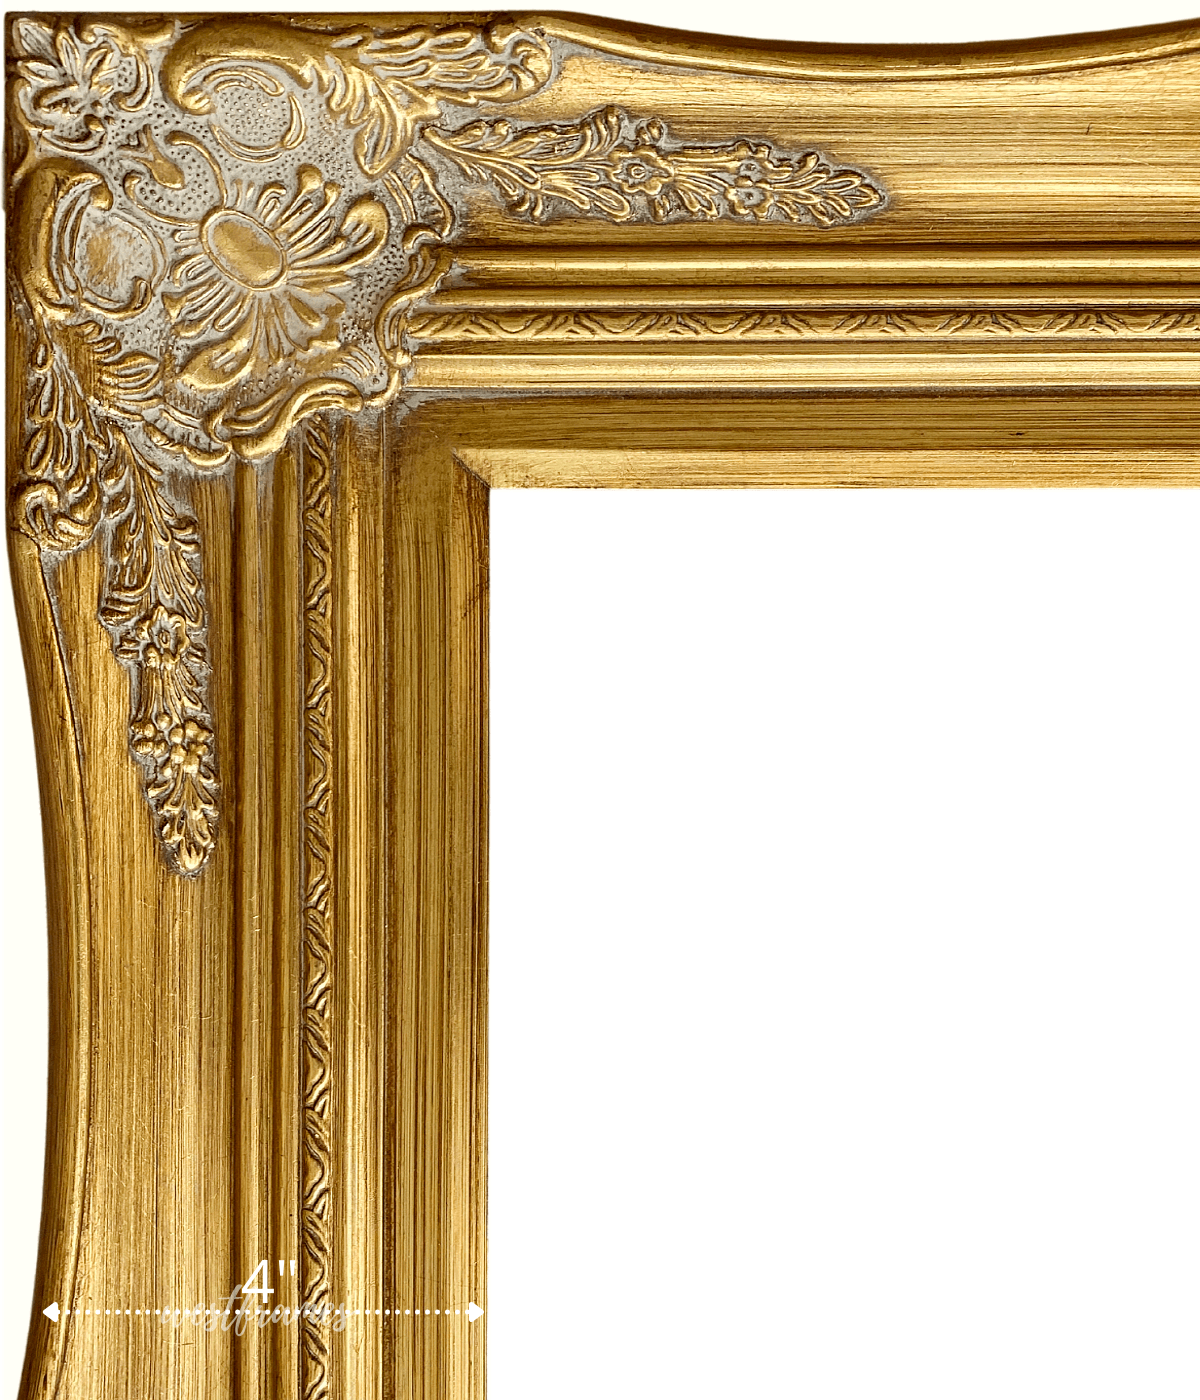 20x20 Frame Gold Real Wood Picture Frame Width 2 inches | Interior